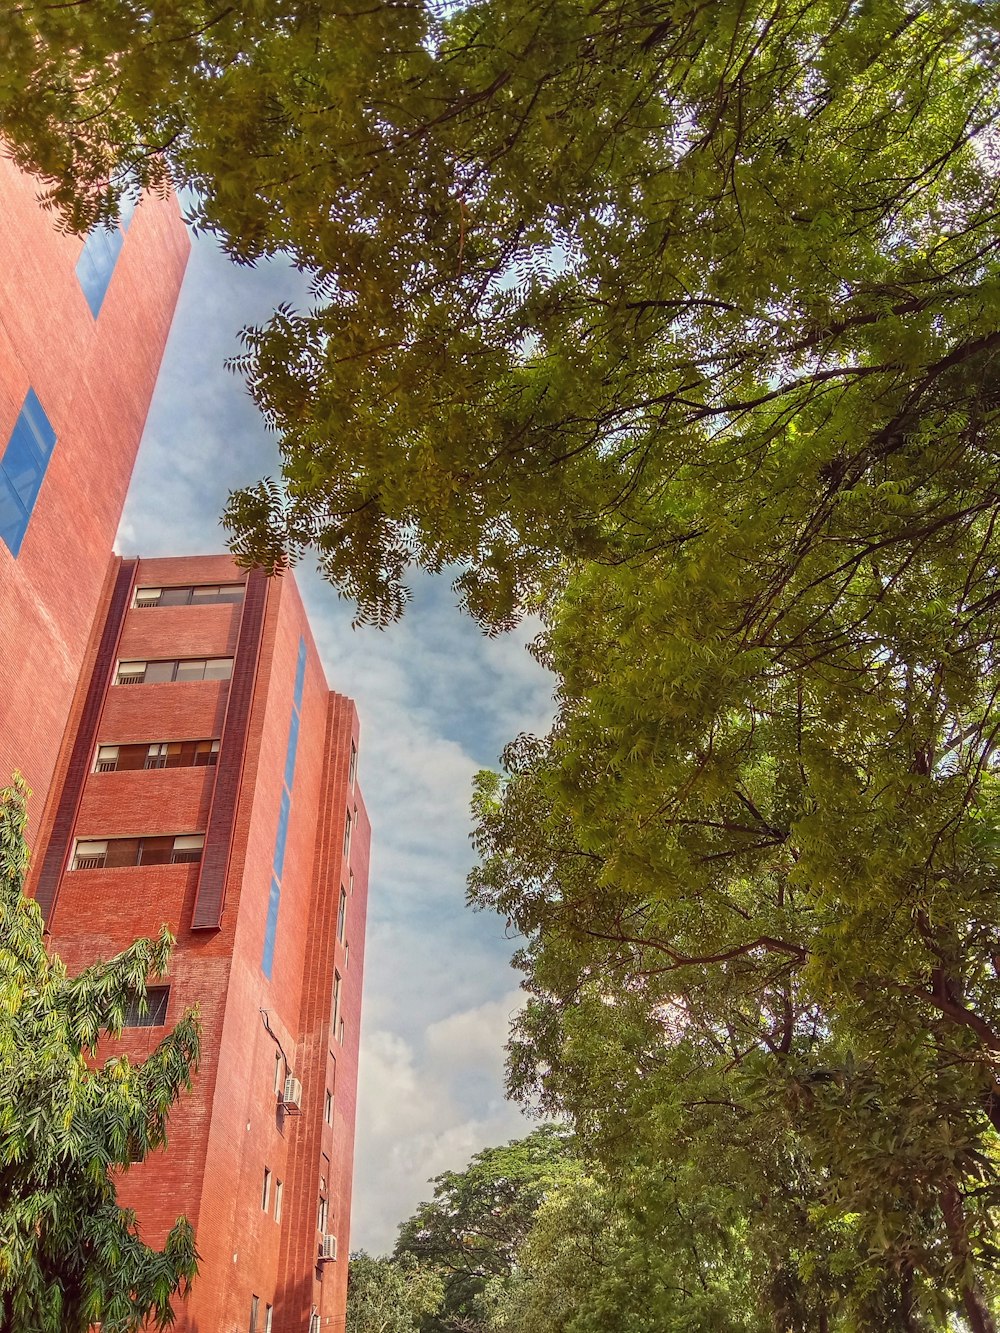 a tall red building sitting next to a lush green forest